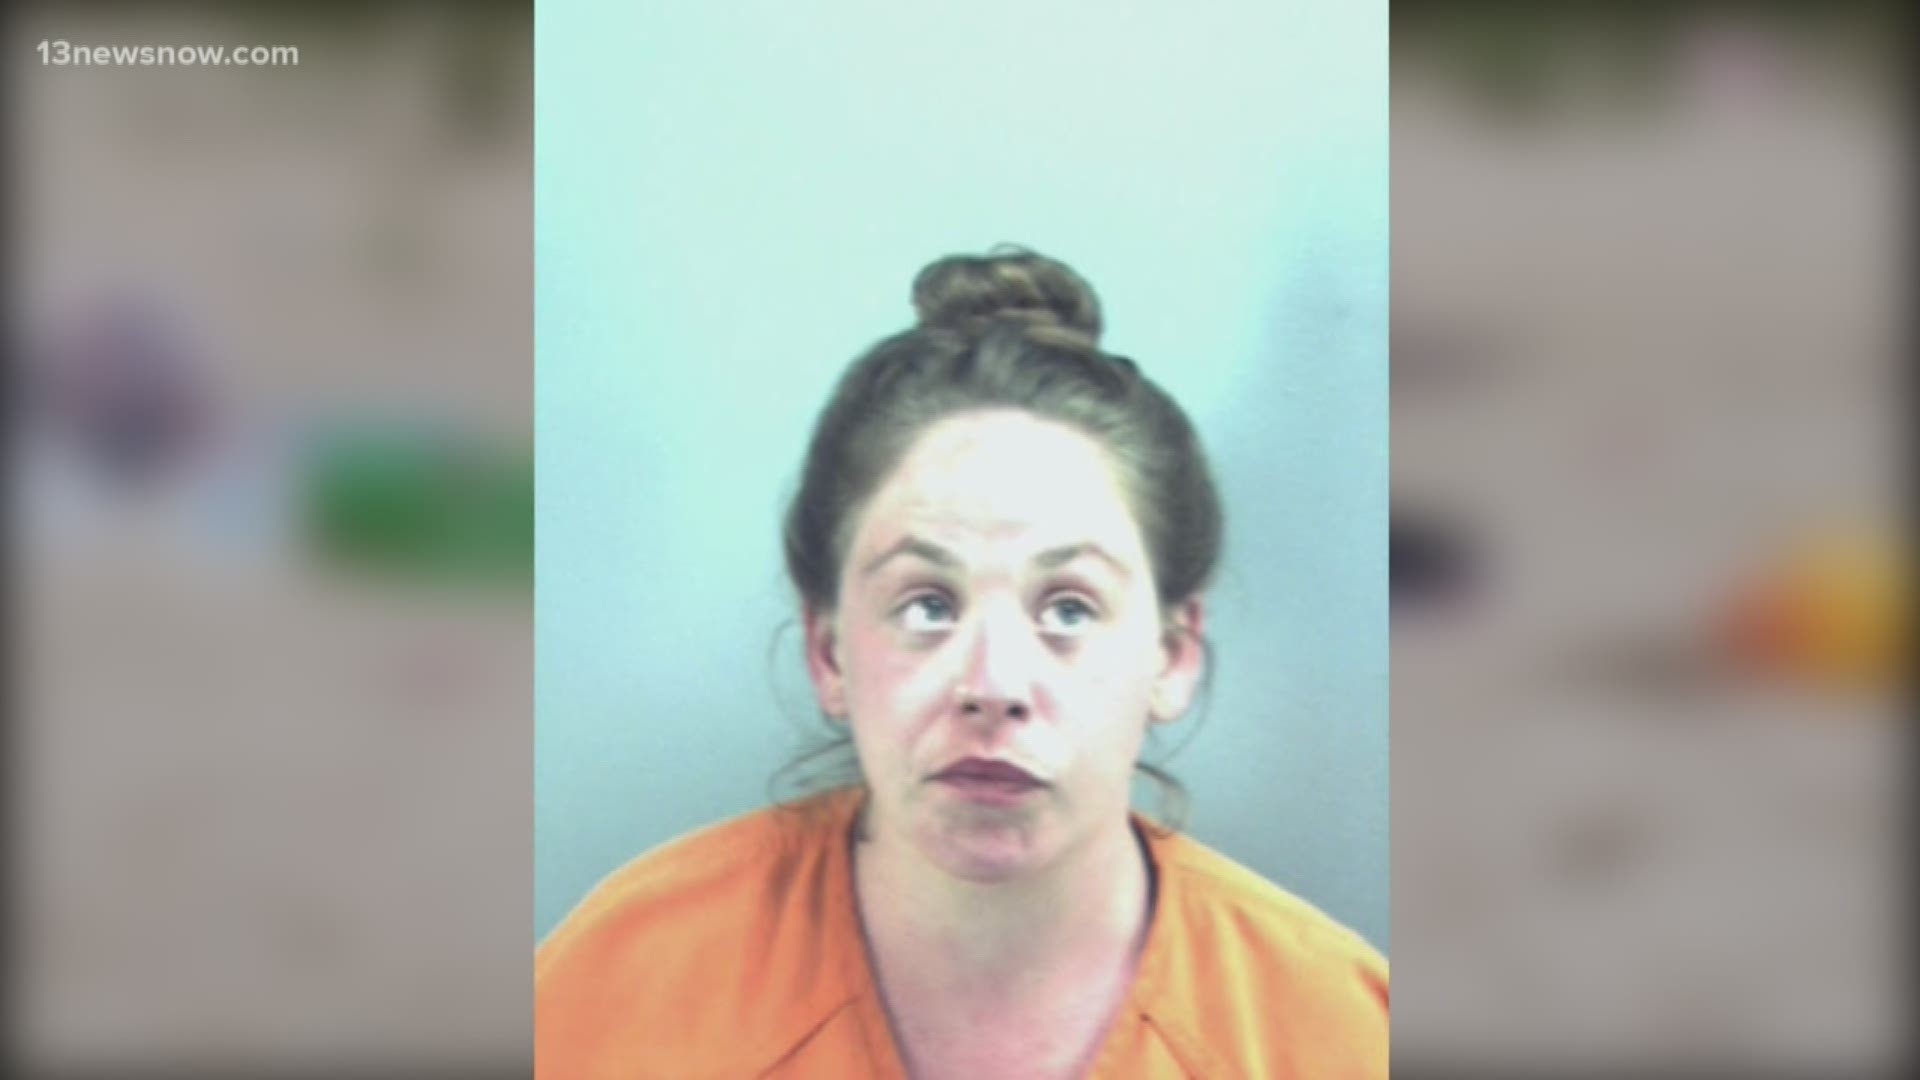 Police said 27-year-old Shelby Ross Oliver abandoned two of her kids at Floatopia. She was charged with child neglect and public intoxication.